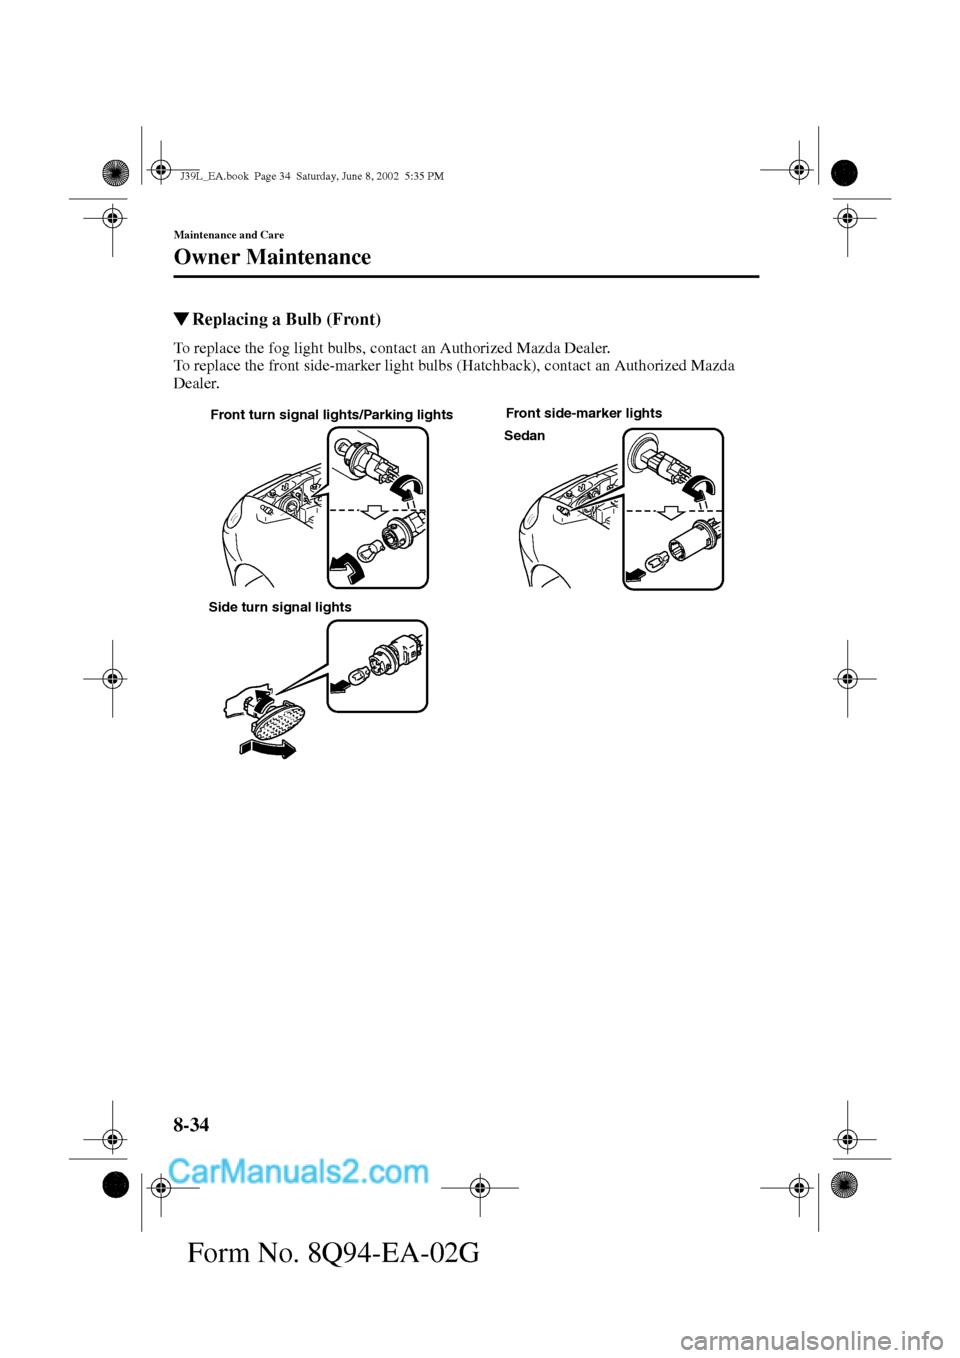 MAZDA MODEL PROTÉGÉ 2003  Owners Manual (in English) 8-34
Maintenance and Care
Owner Maintenance
Form No. 8Q94-EA-02G
Replacing a Bulb (Front)
To replace the fog light bulbs, contact an Authorized Mazda Dealer.
To replace the front side-marker light bu